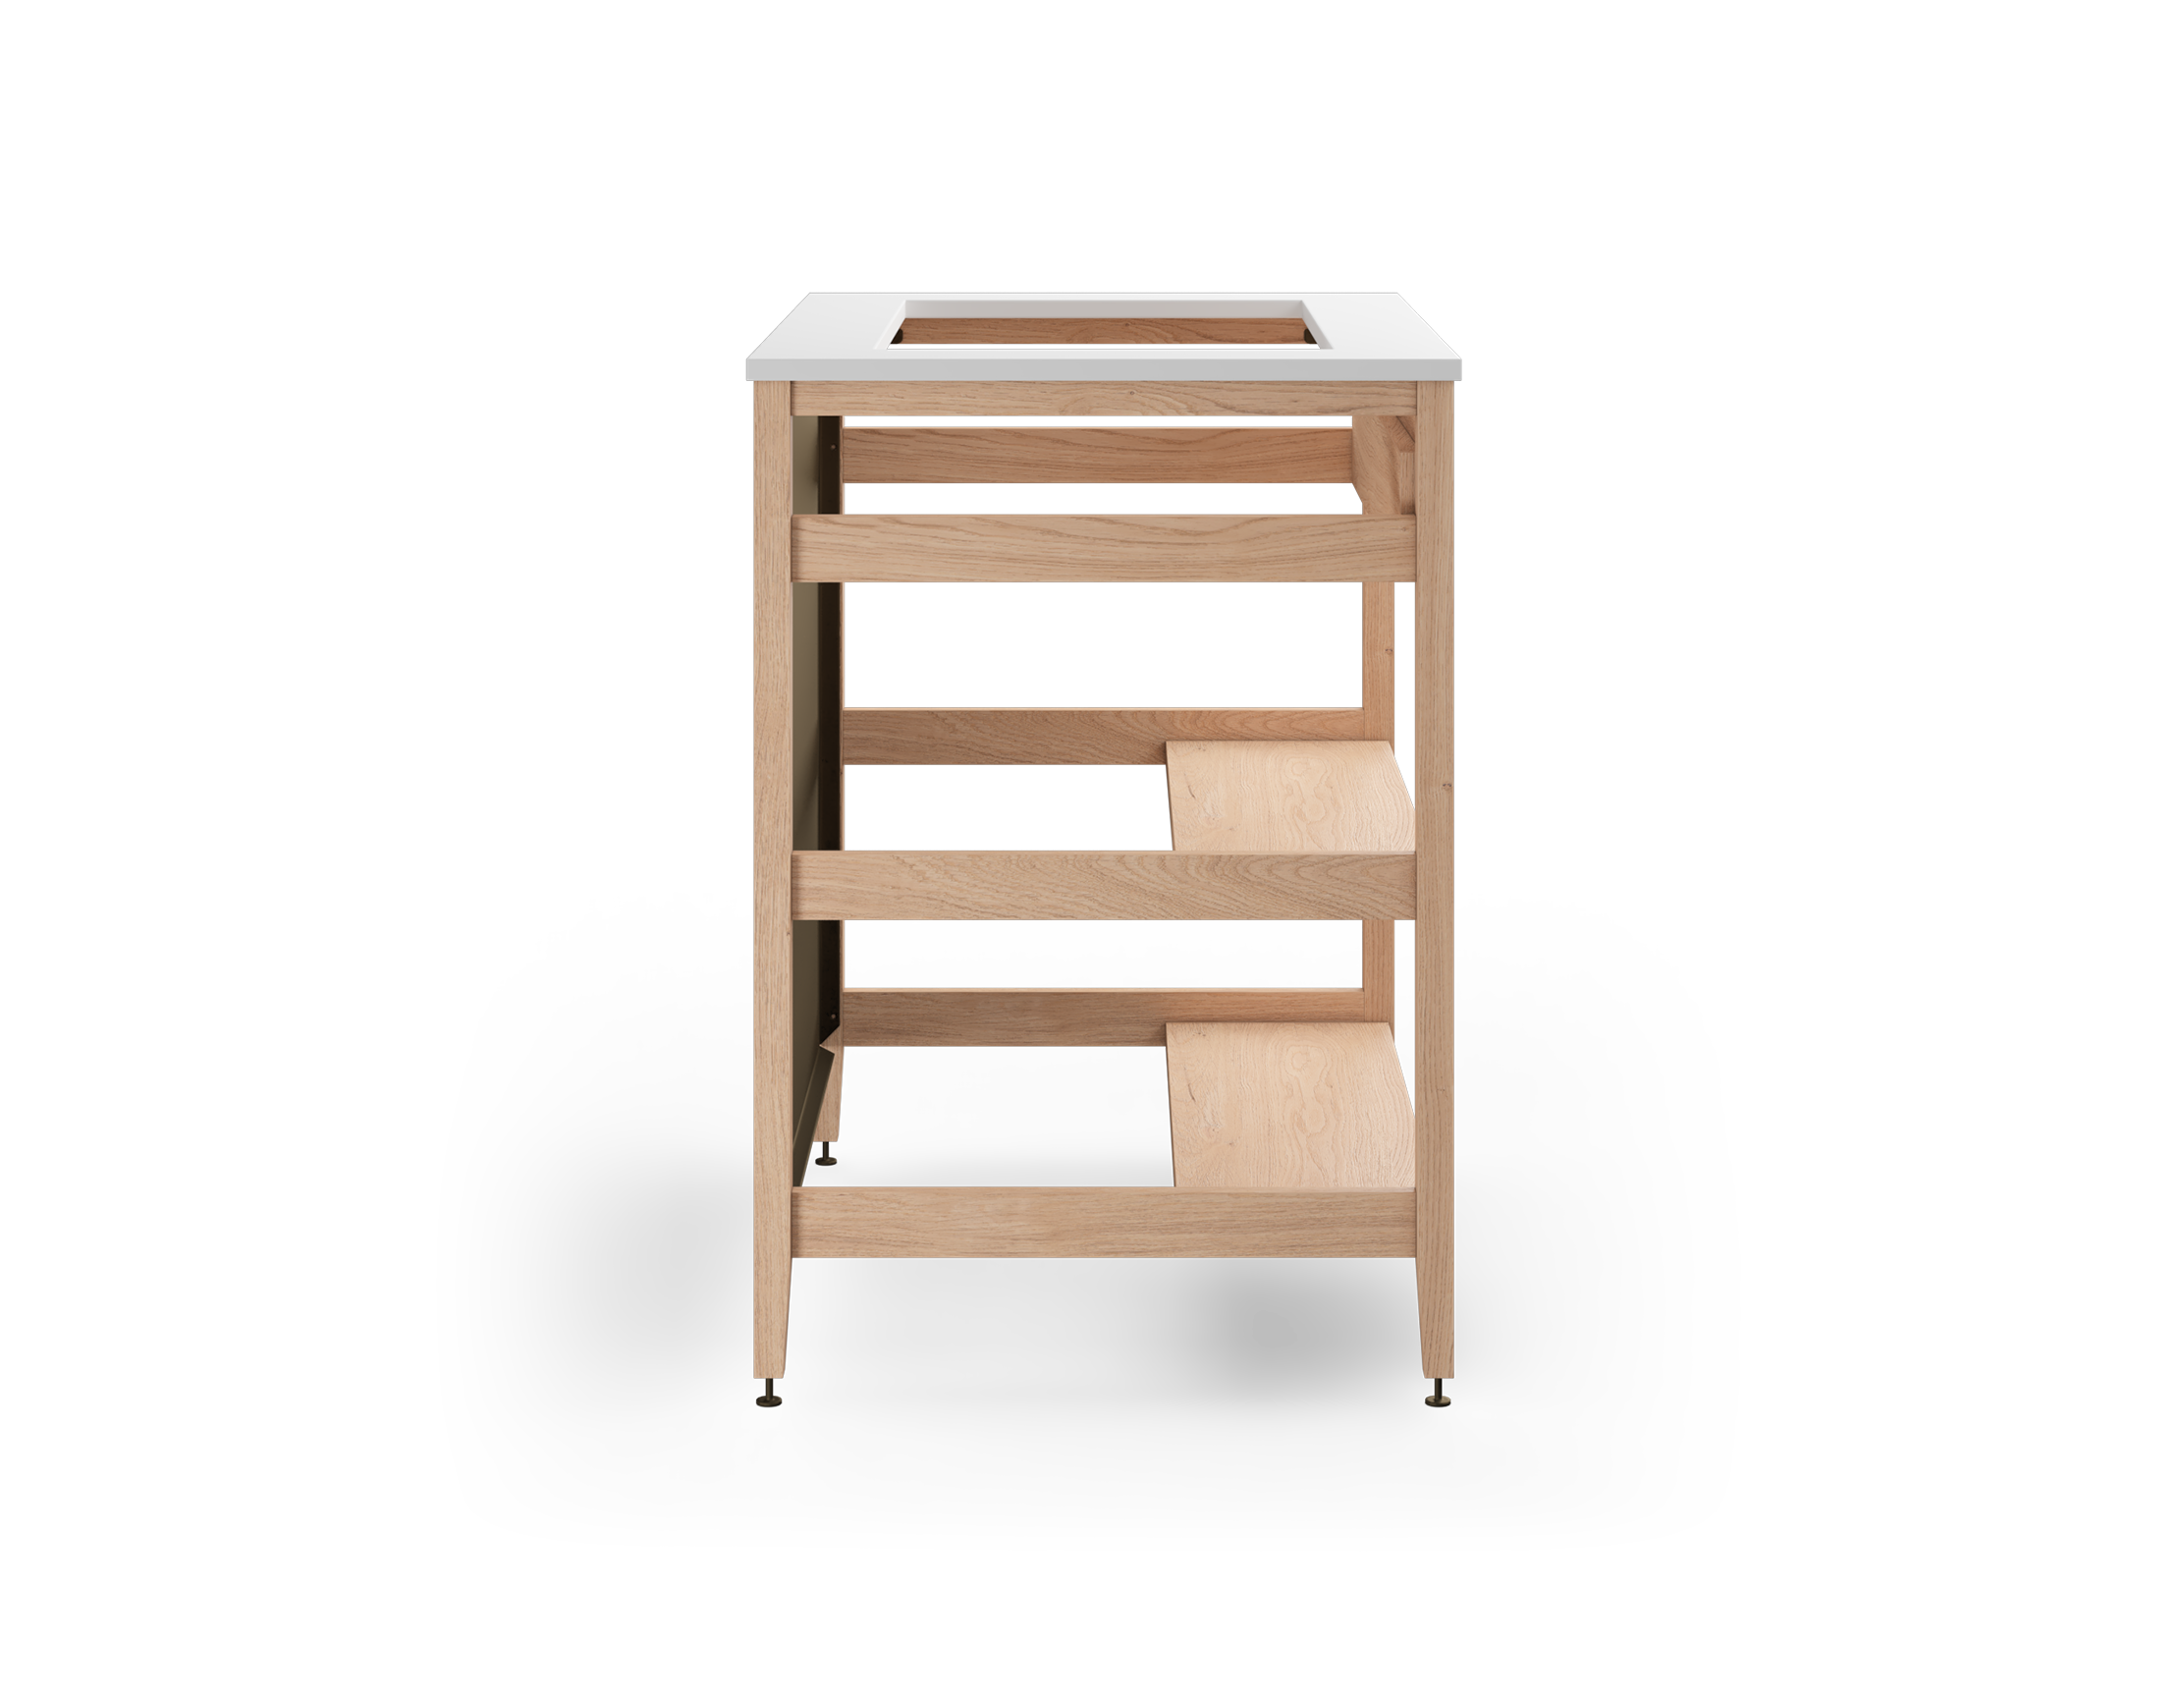 Coquo modular sink cabinet with tall metal back + Front + 2 half shelves in natural oak.
